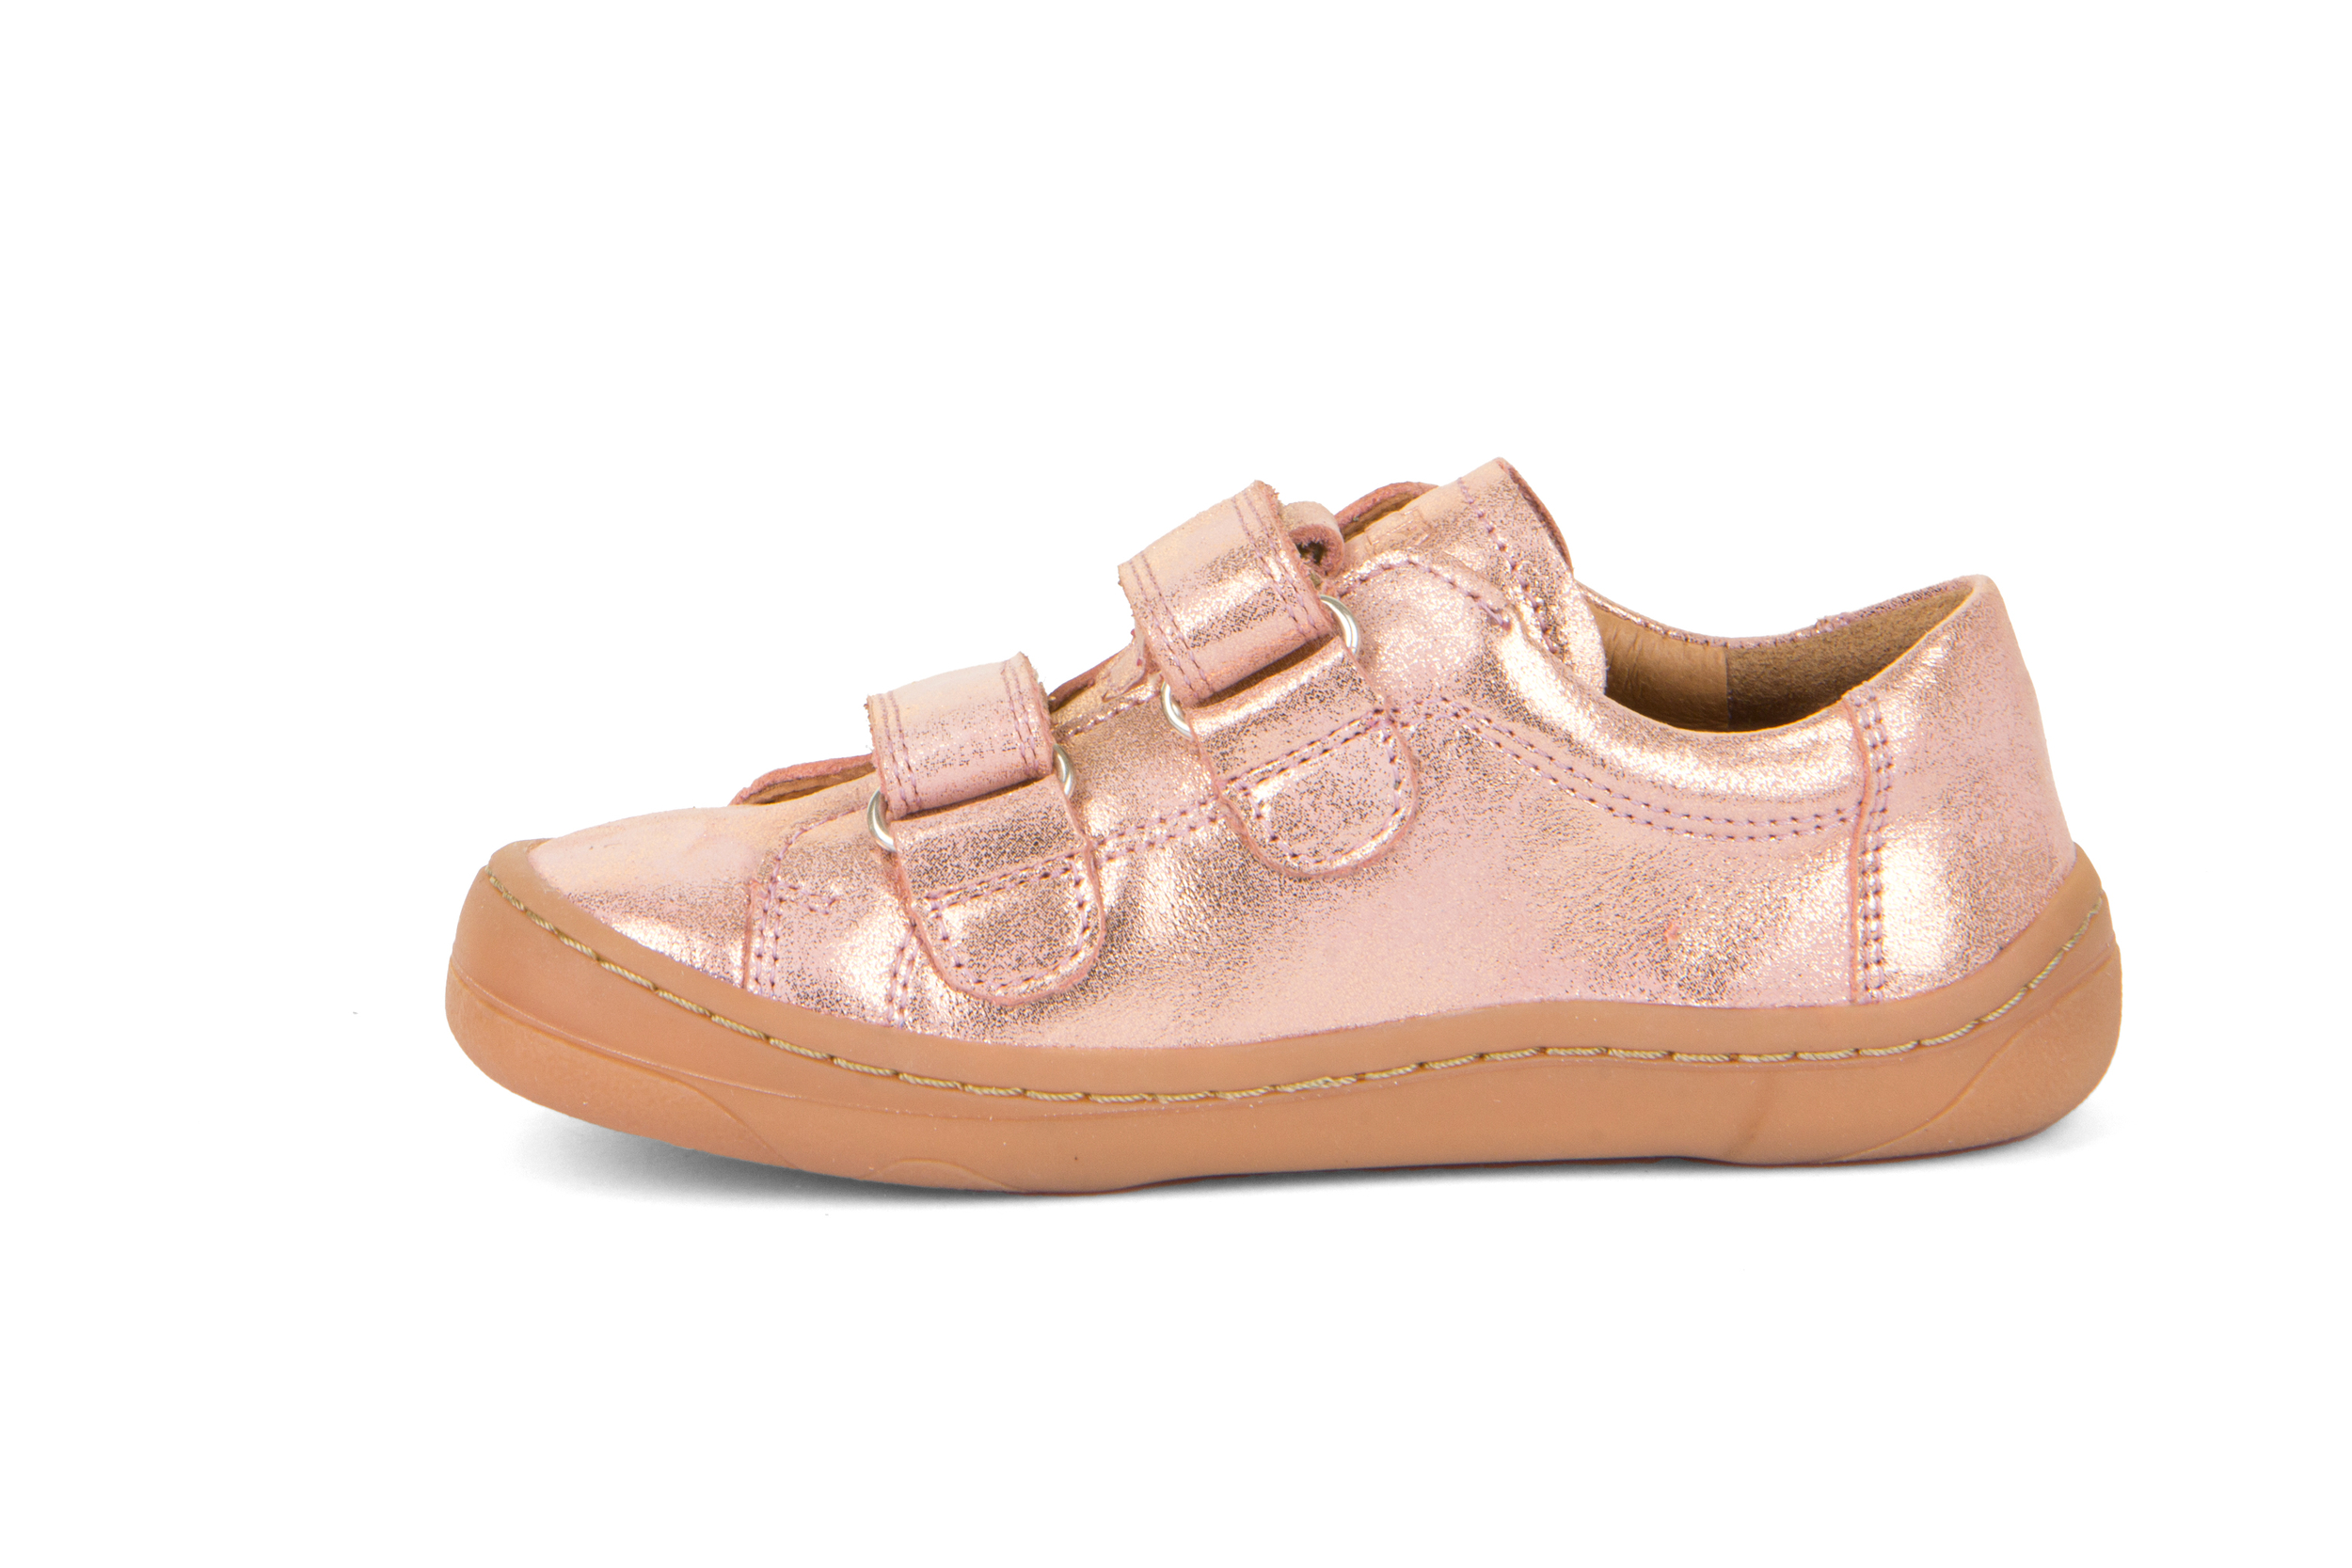 sneakers cuir froddo barefoot pink gold G3130225-11 sur la boutique liberty pieds-1